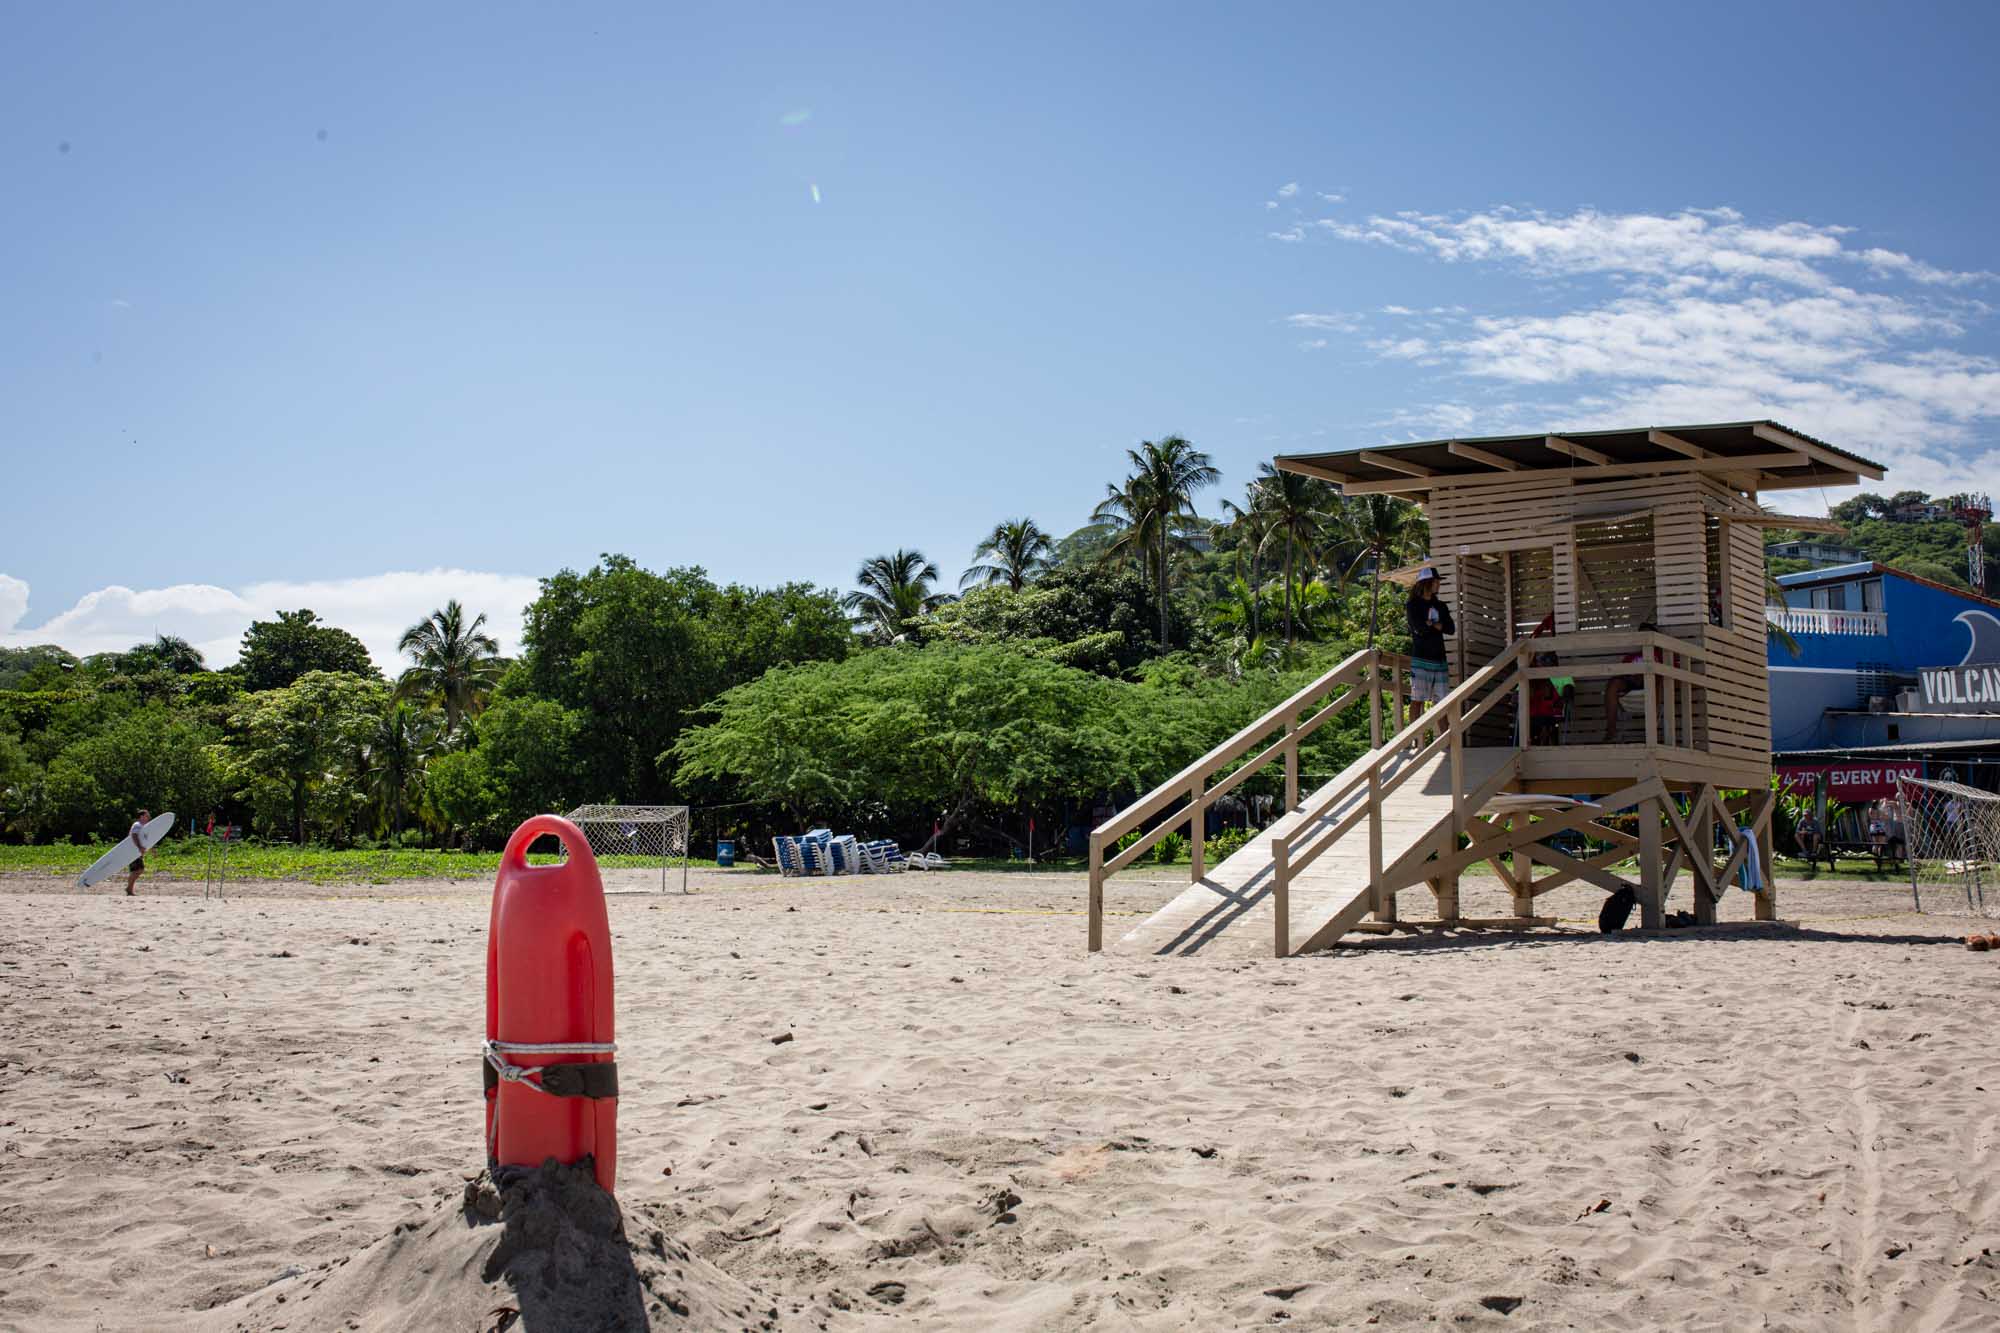 Tamarindo And Samara Are The Only Beaches In Guanacaste With Lifeguards How Did They Do It